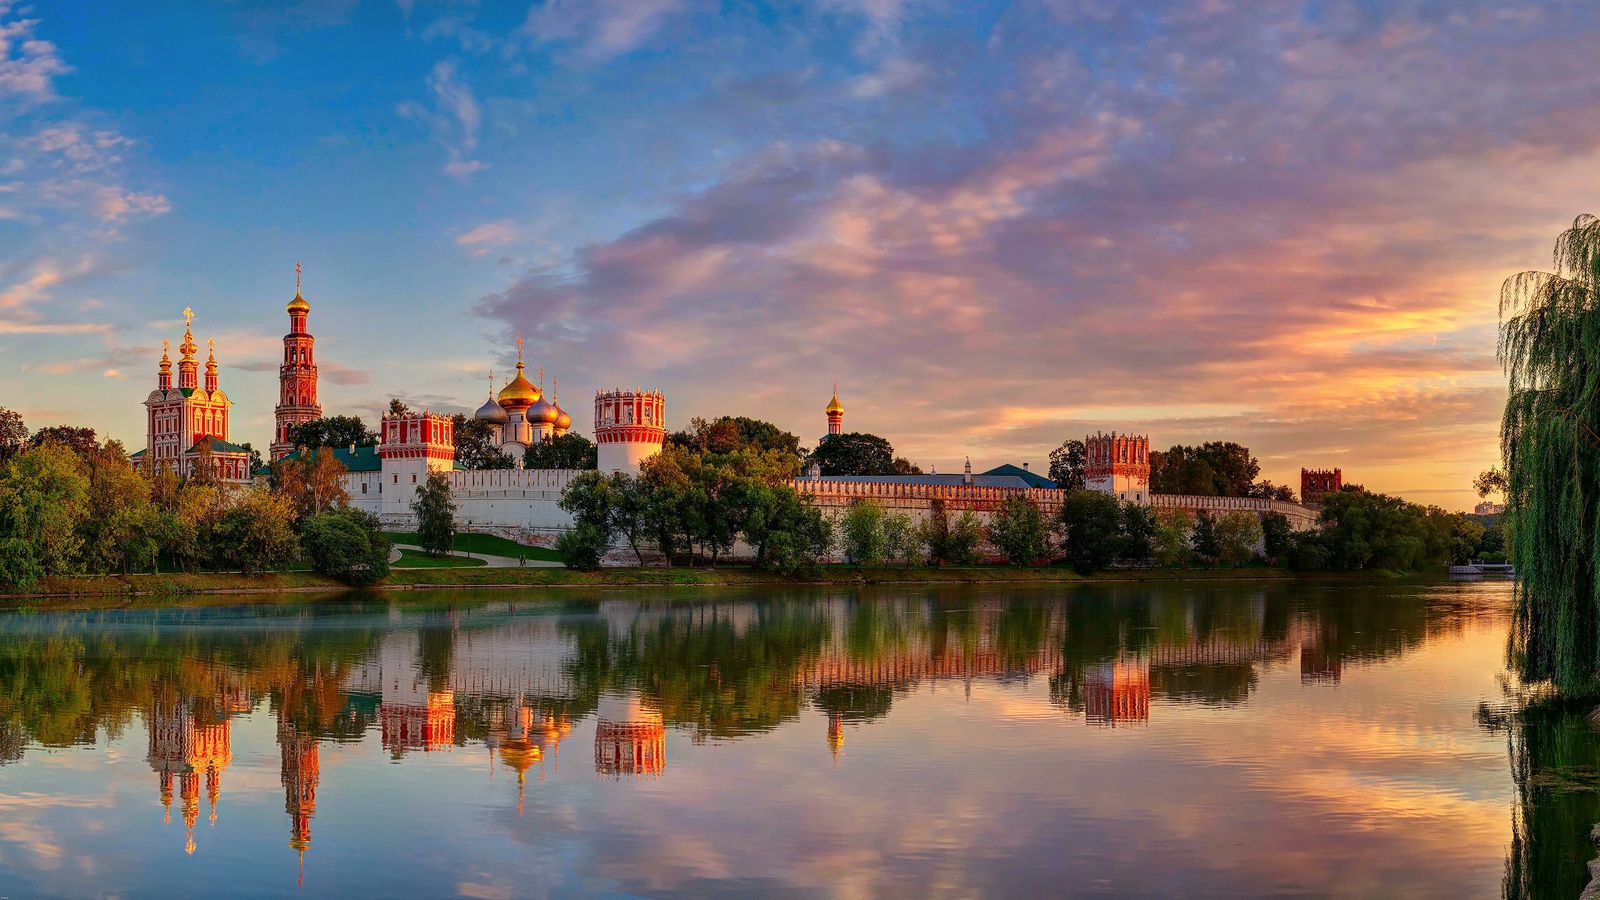 Download wallpaper 1600x900 moscow, novodevichy convent mother of god of smolensk, summer widescreen 16:9 HD background